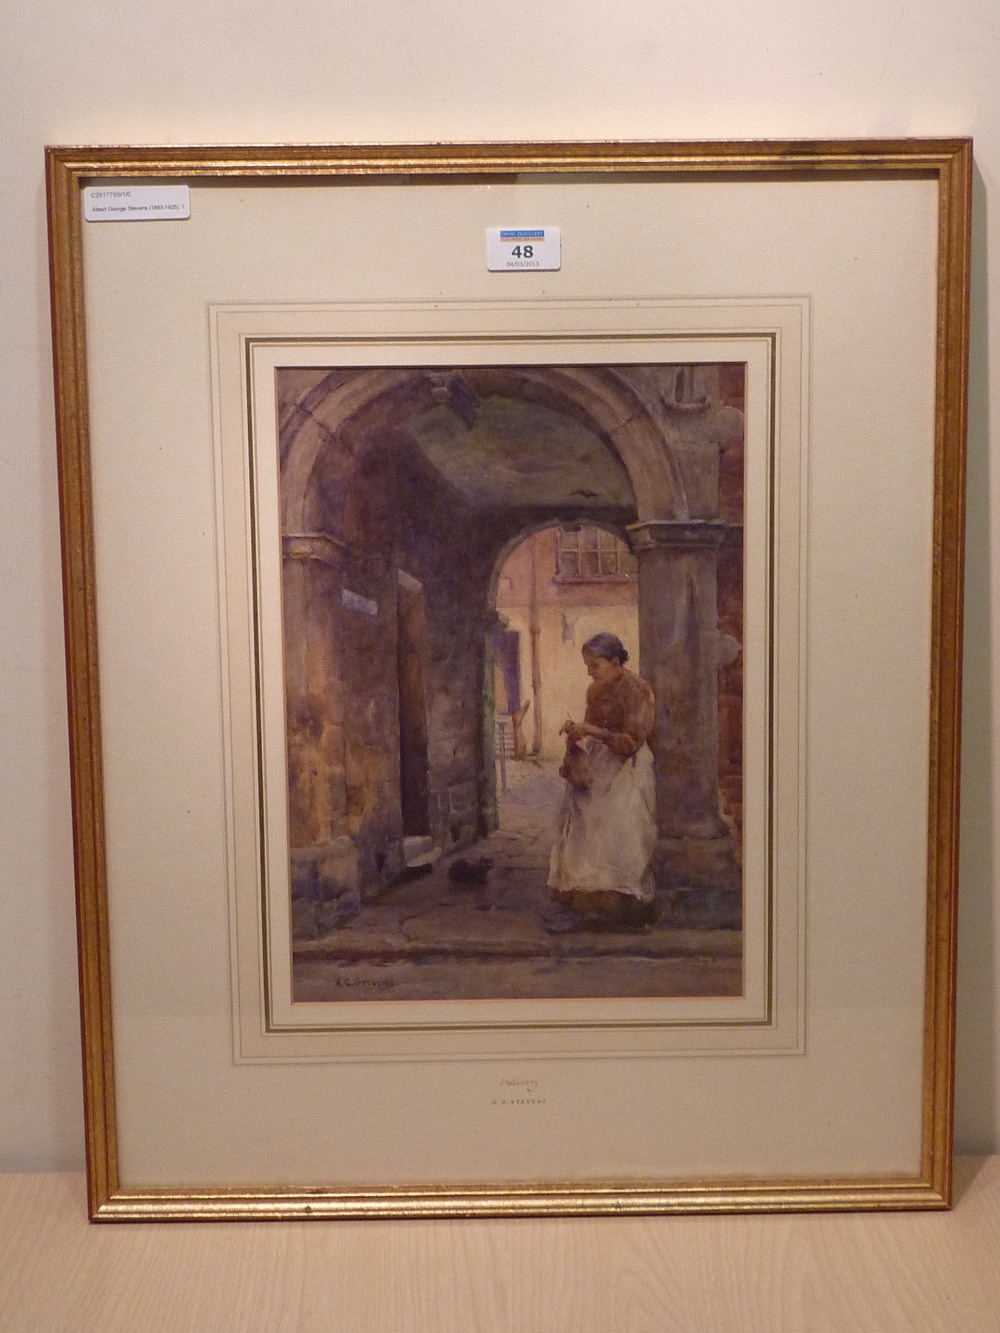 Albert George Stevens (1863-1925): 'Industry' woman knitting under an archway, watercolour signed